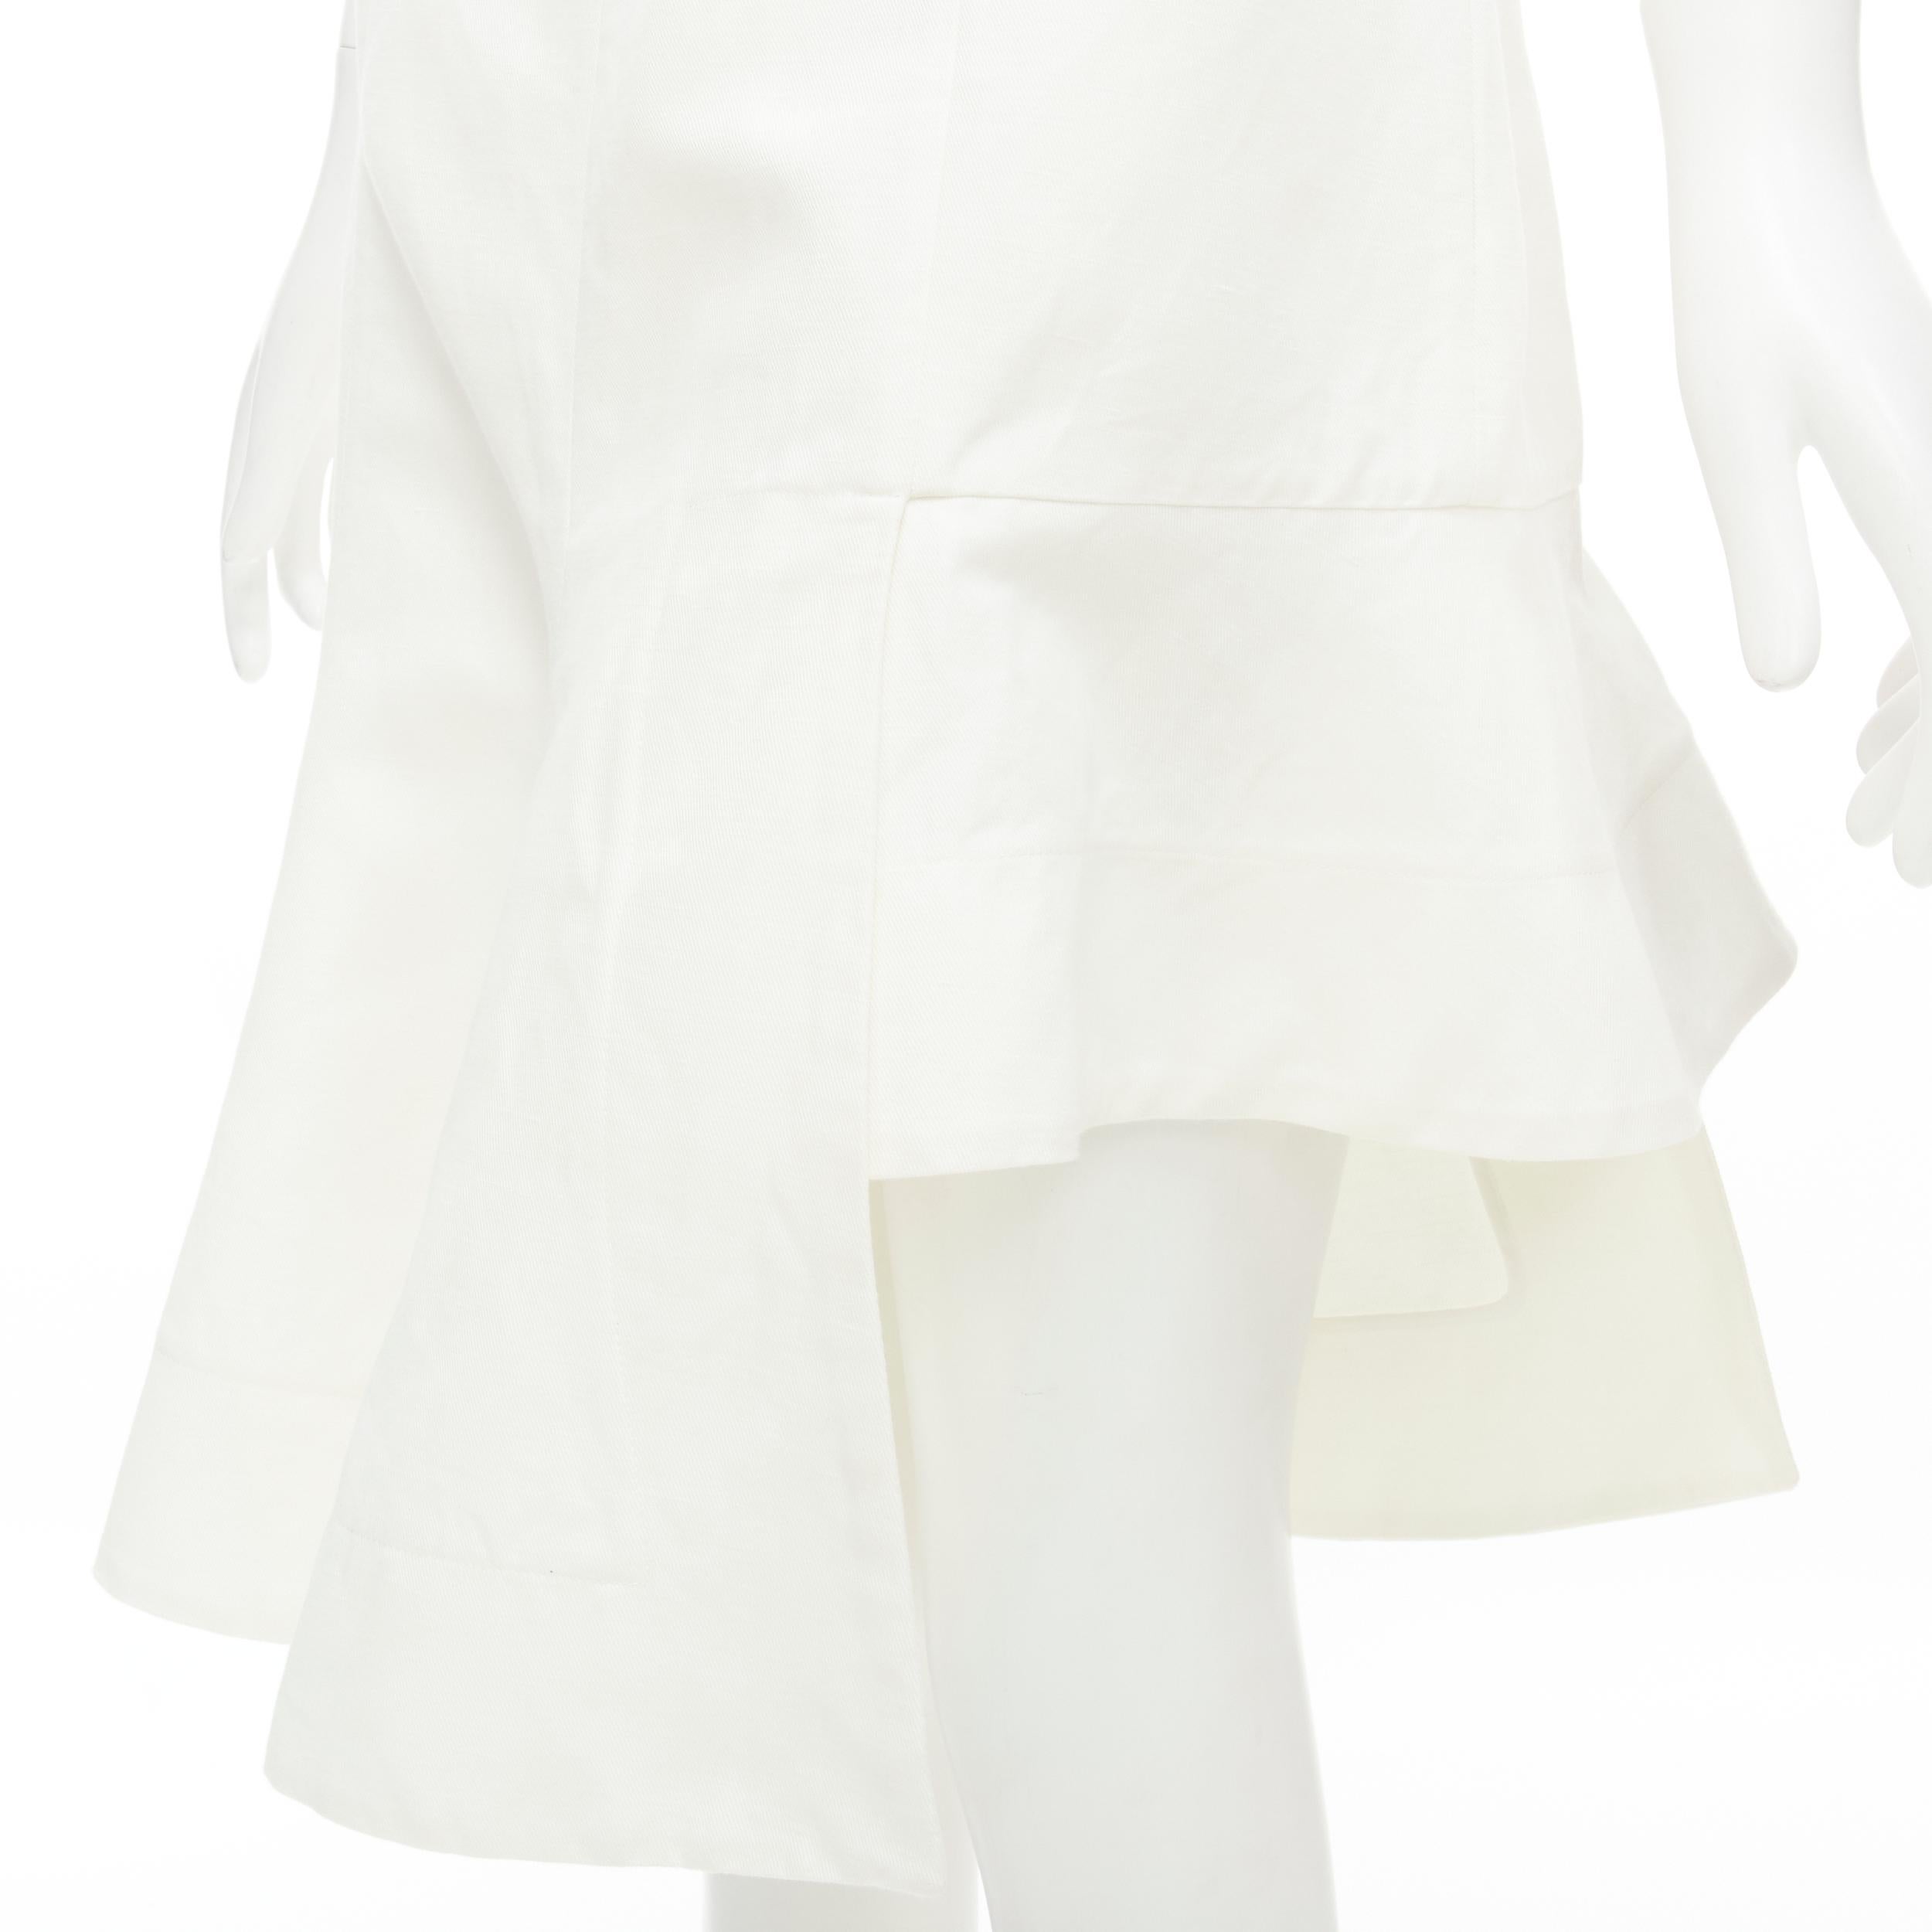 MARNI white cotton linen asymmetric step hem pleated flared skirt IT42 S
Reference: CELG/A00096
Brand: Marni
Material: Cotton, Linen
Color: White
Pattern: Solid
Closure: Zip
Made in: Italy

CONDITION:
Condition: Excellent, this item was pre-owned